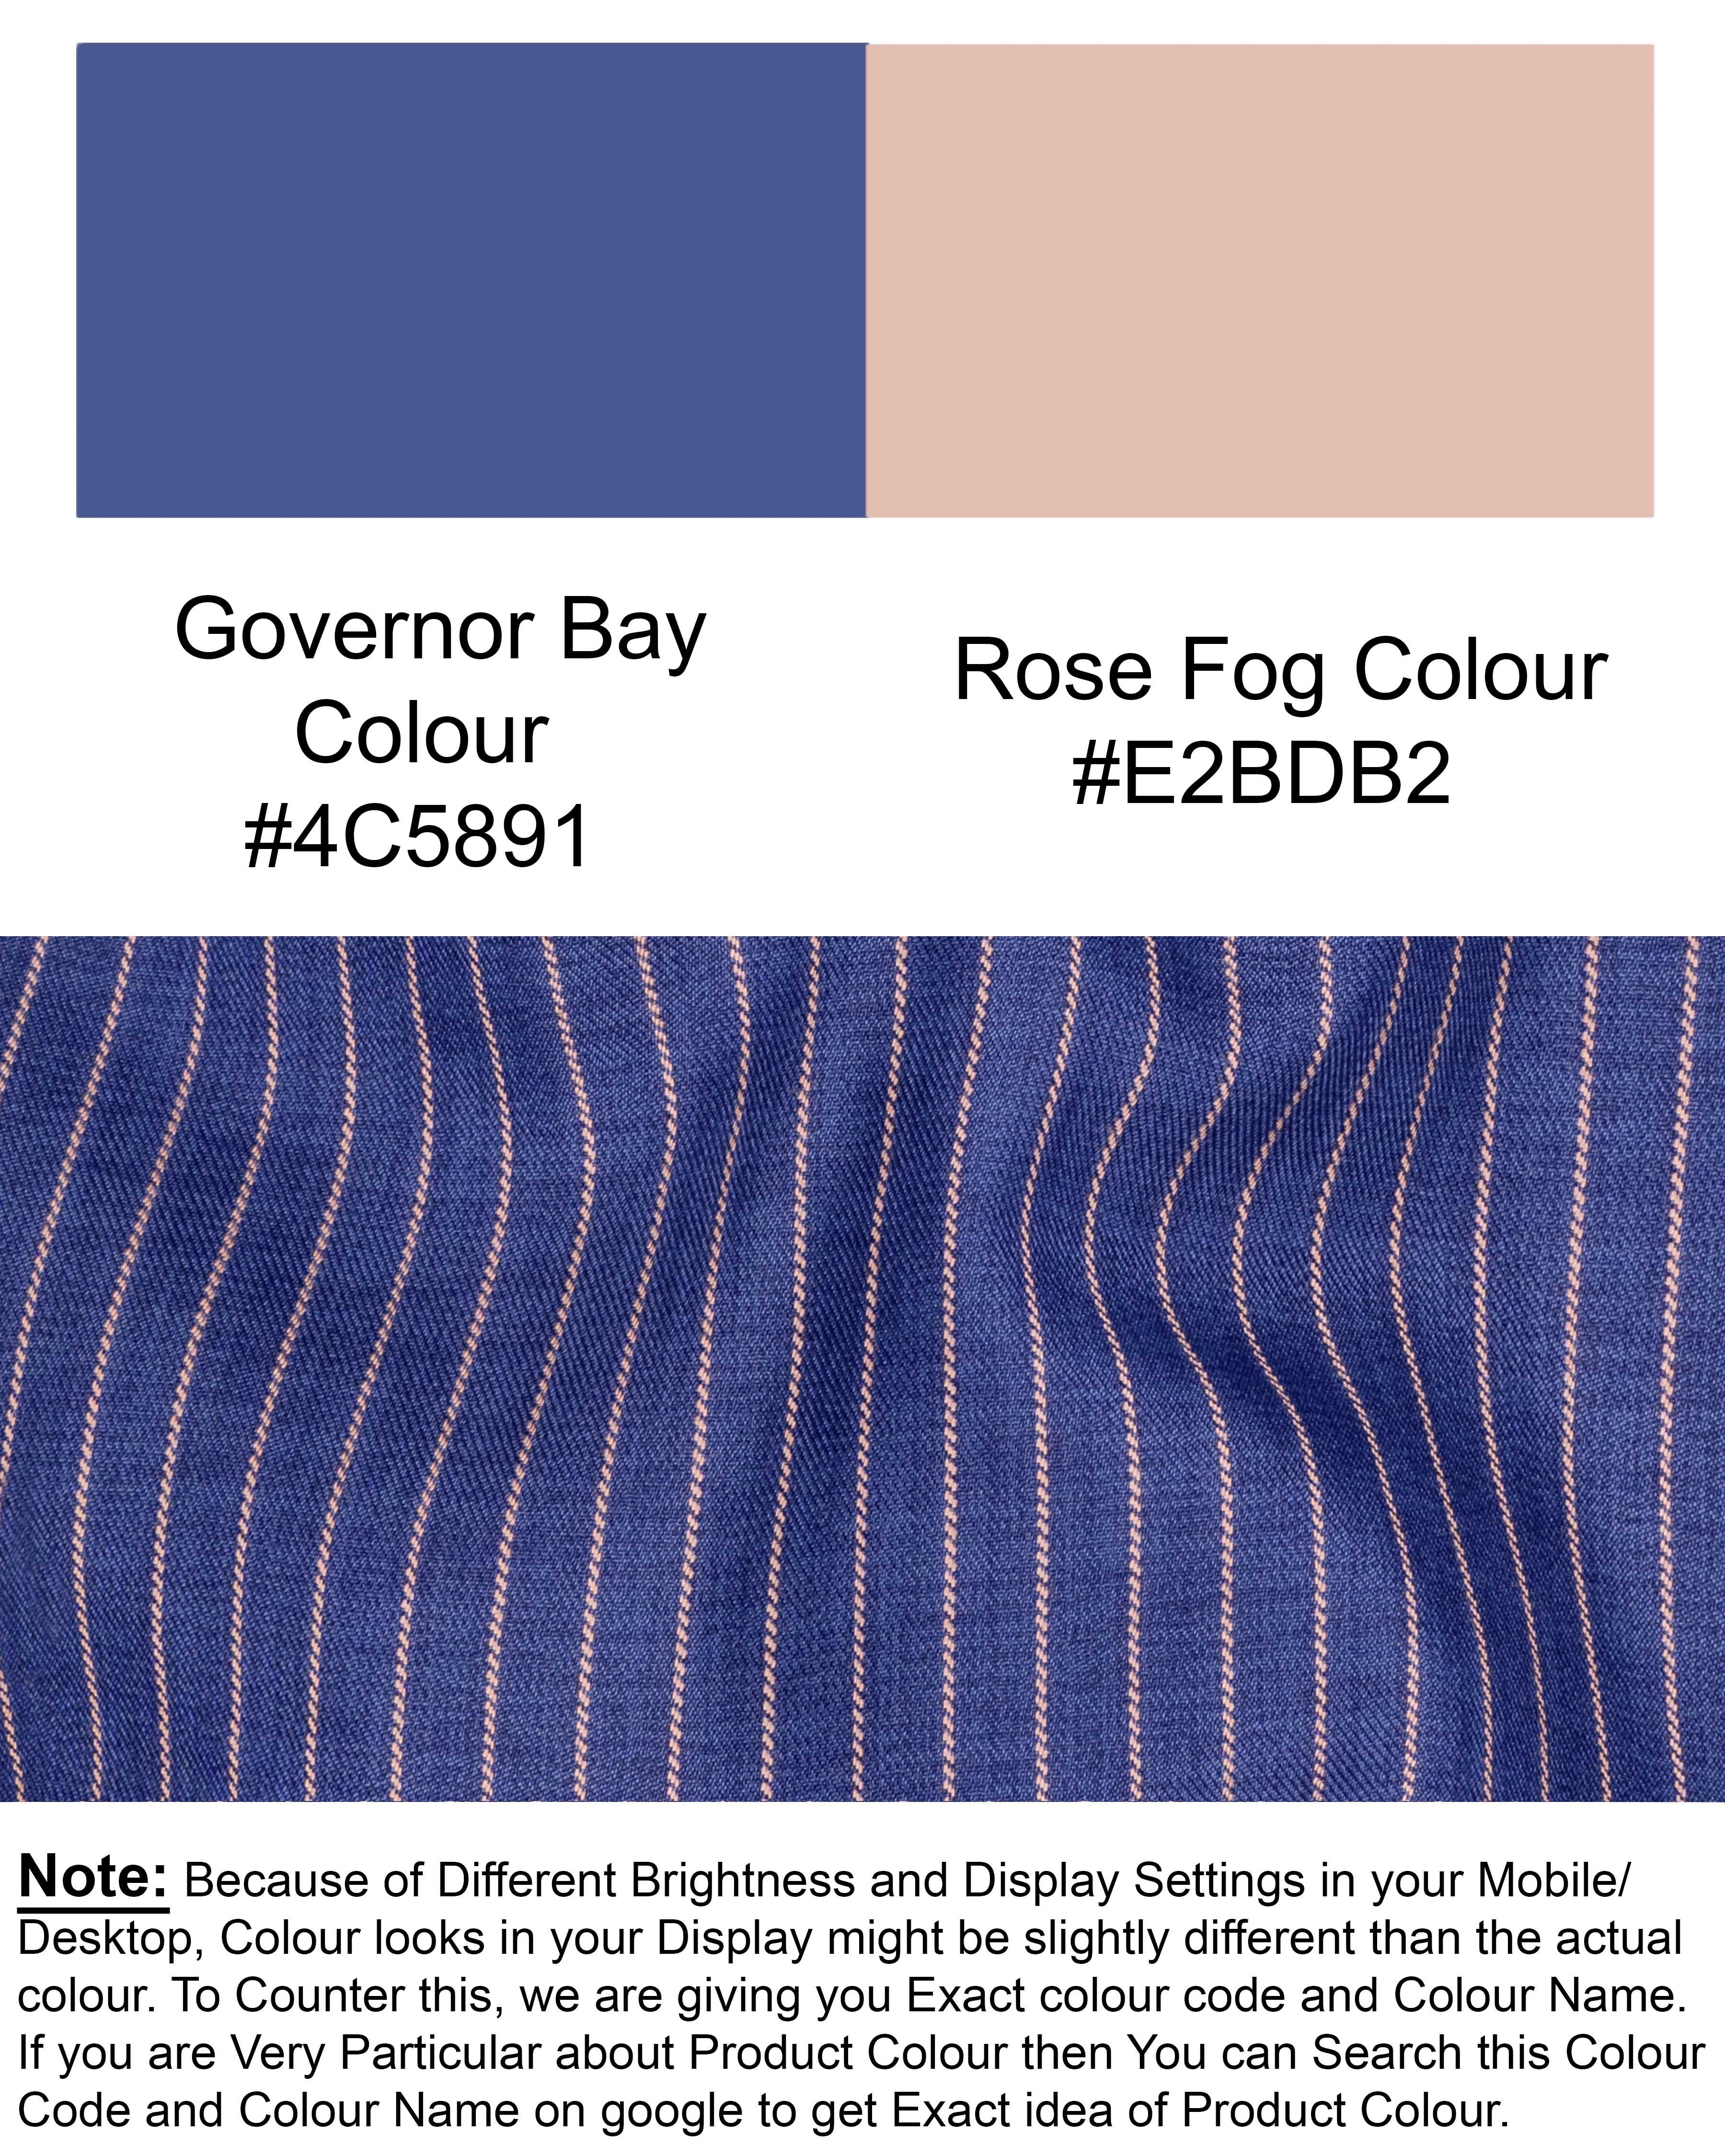 Governor Bay Blue Striped Wool Rich Sports Blazer BL1503-SB-PP-36, BL1503-SB-PP-38, BL1503-SB-PP-40, BL1503-SB-PP-42, BL1503-SB-PP-44, BL1503-SB-PP-46, BL1503-SB-PP-48, BL1503-SB-PP-50, BL1503-SB-PP-52, BL1503-SB-PP-54, BL1503-SB-PP-56, BL1503-SB-PP-58, BL1503-SB-PP-60